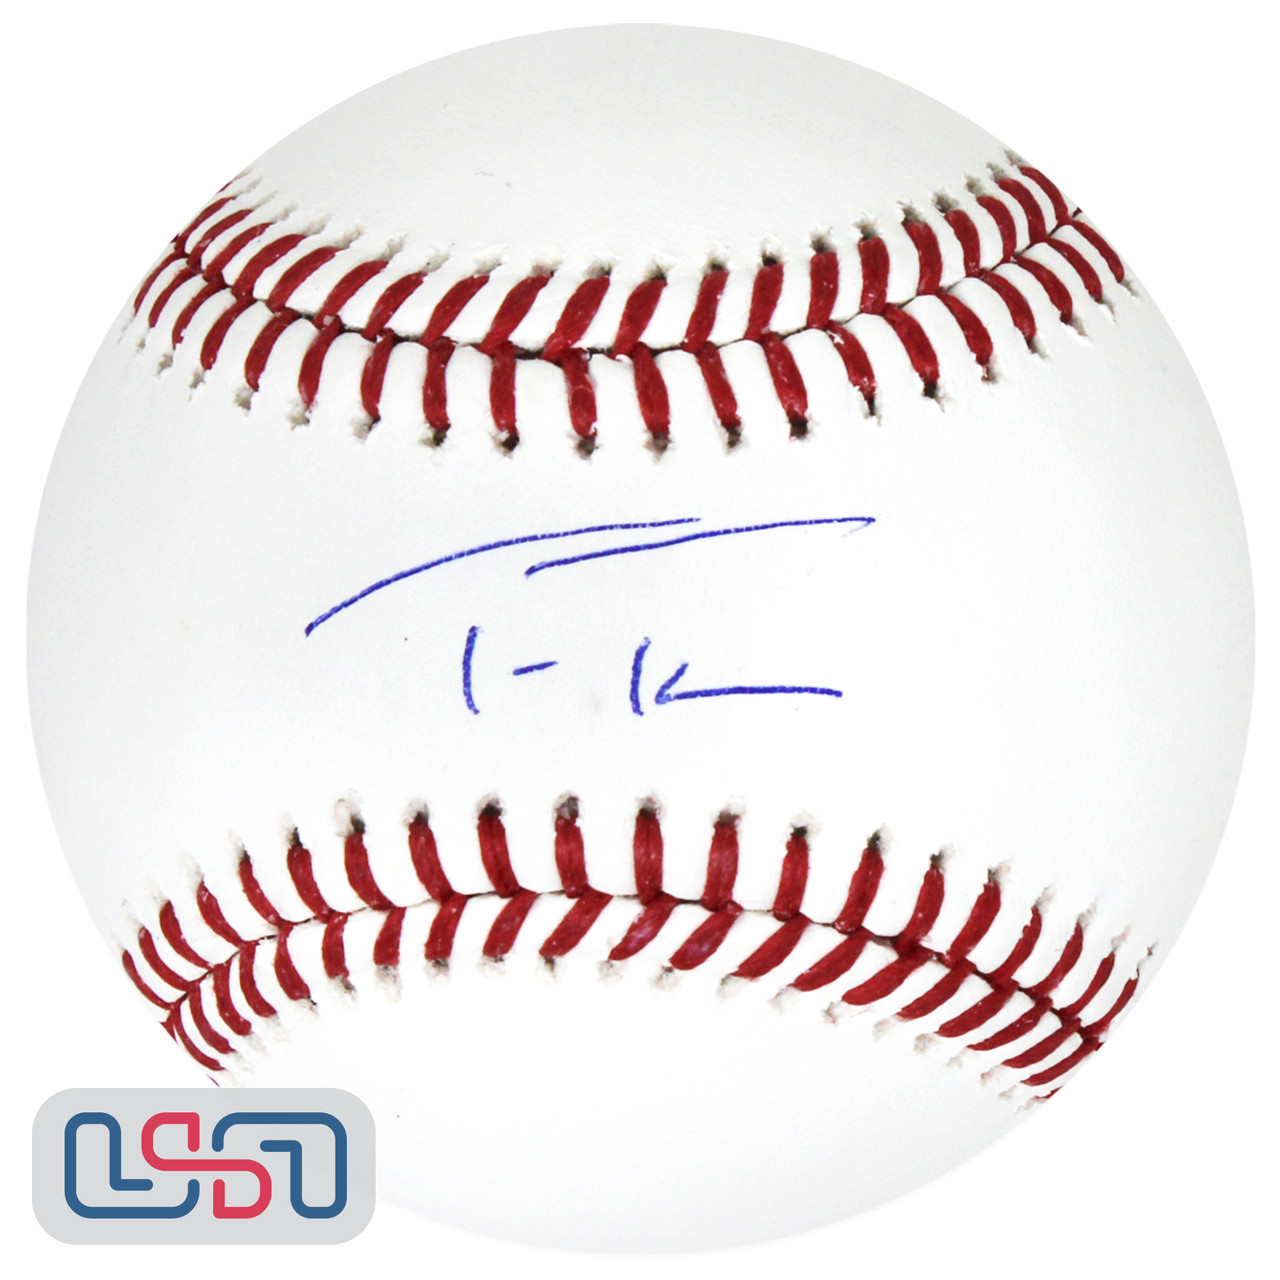 Autograph card signed by Los Angeles Dodgers Trea Turner.